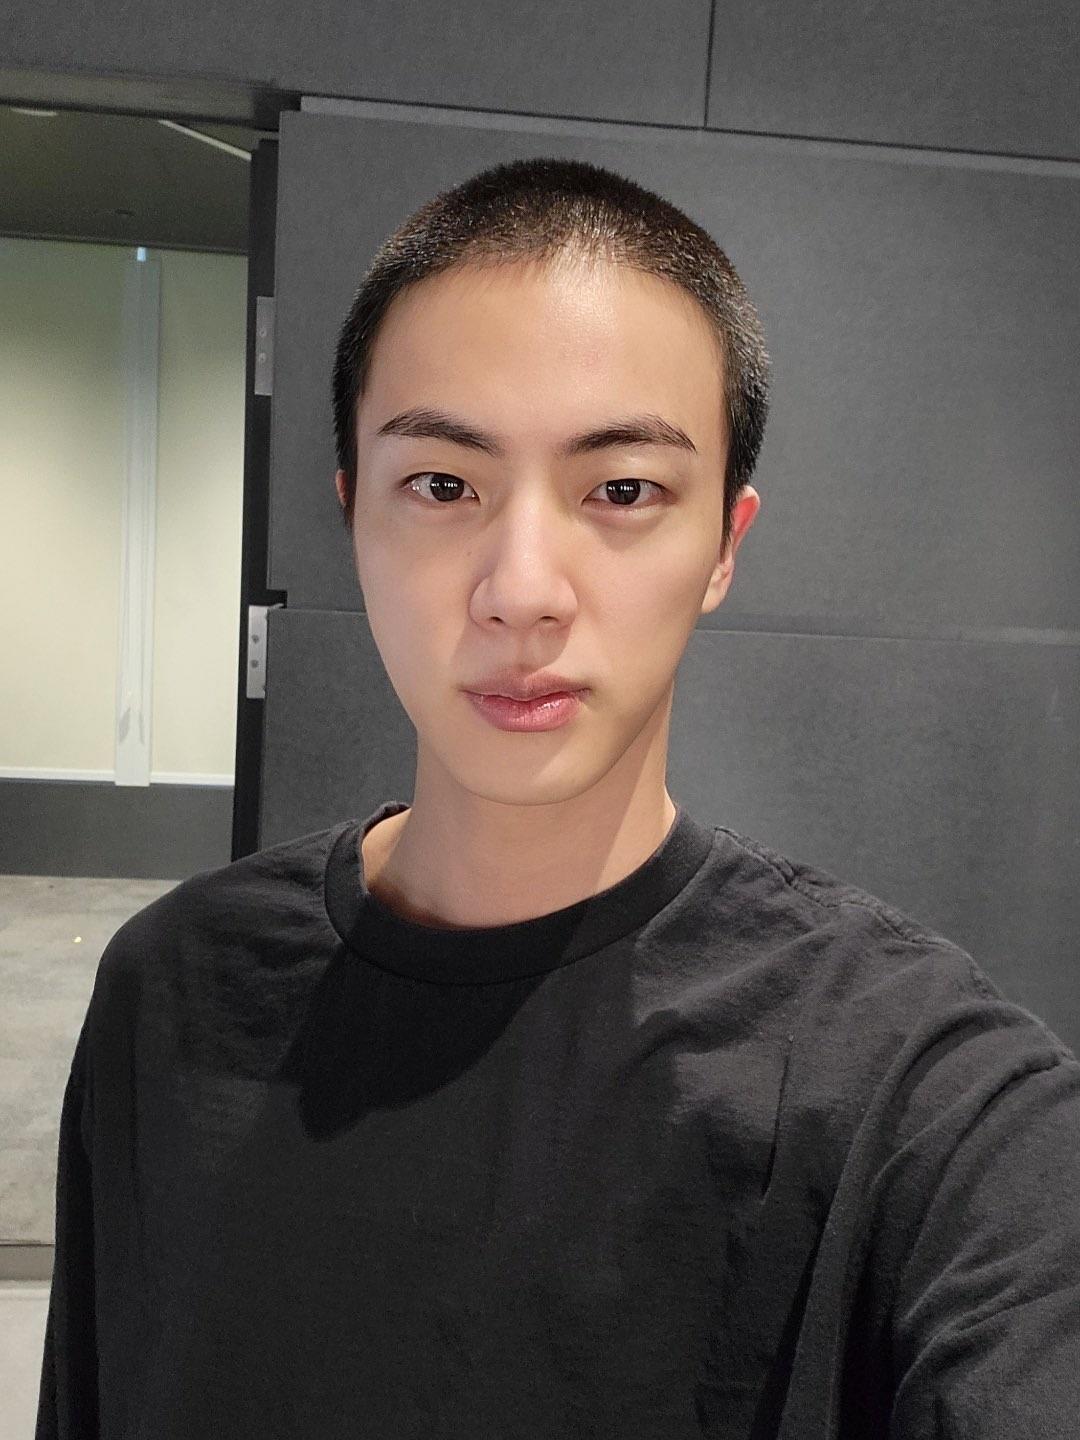 BTS member Jin bids adieu to fans as he joins military; his buzz cut picture goes viral